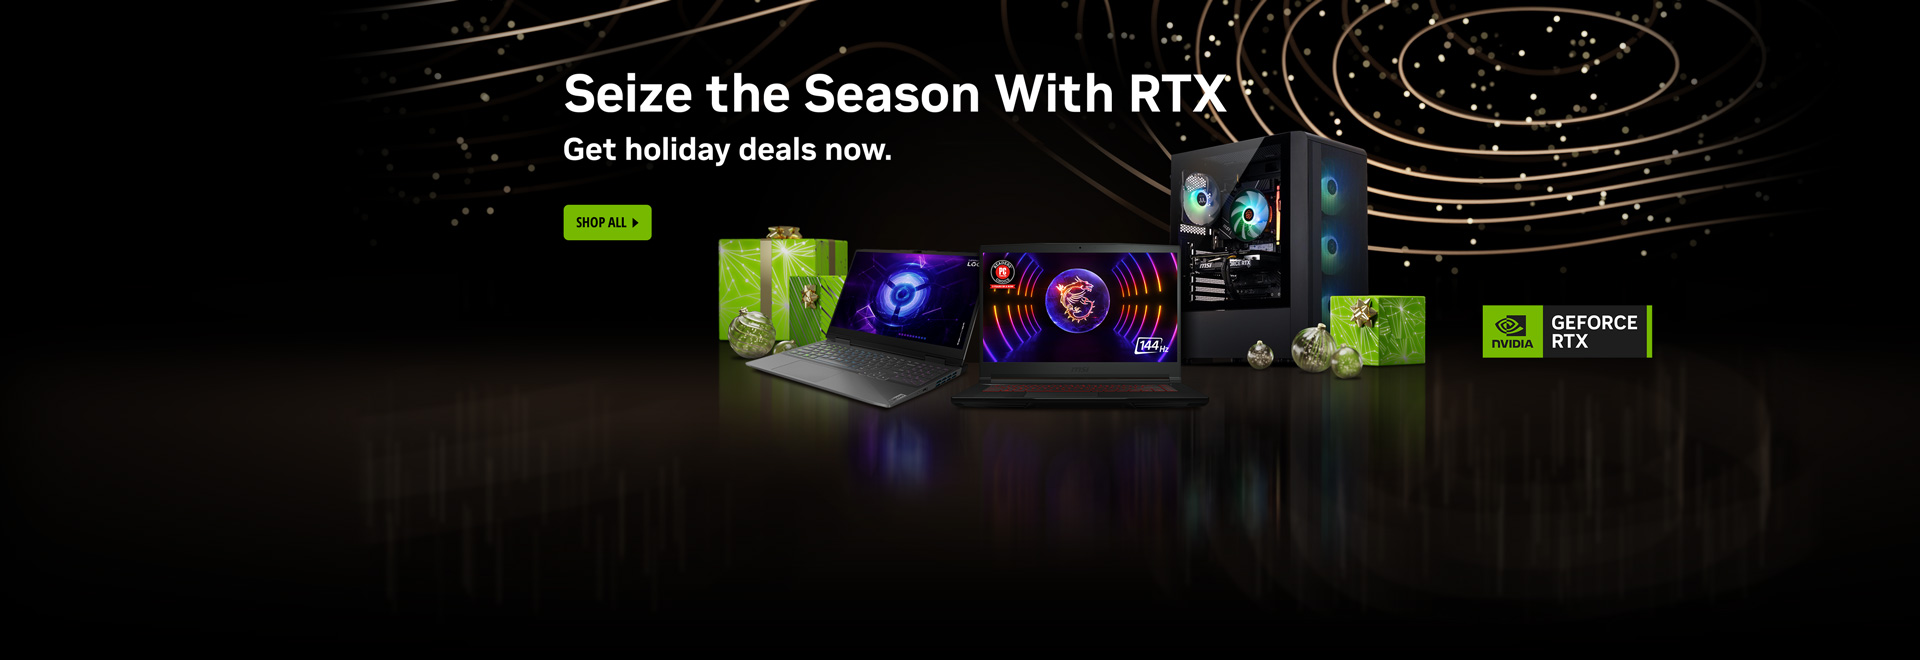 Seize the Season with RTX, Get Holiday Deals Now